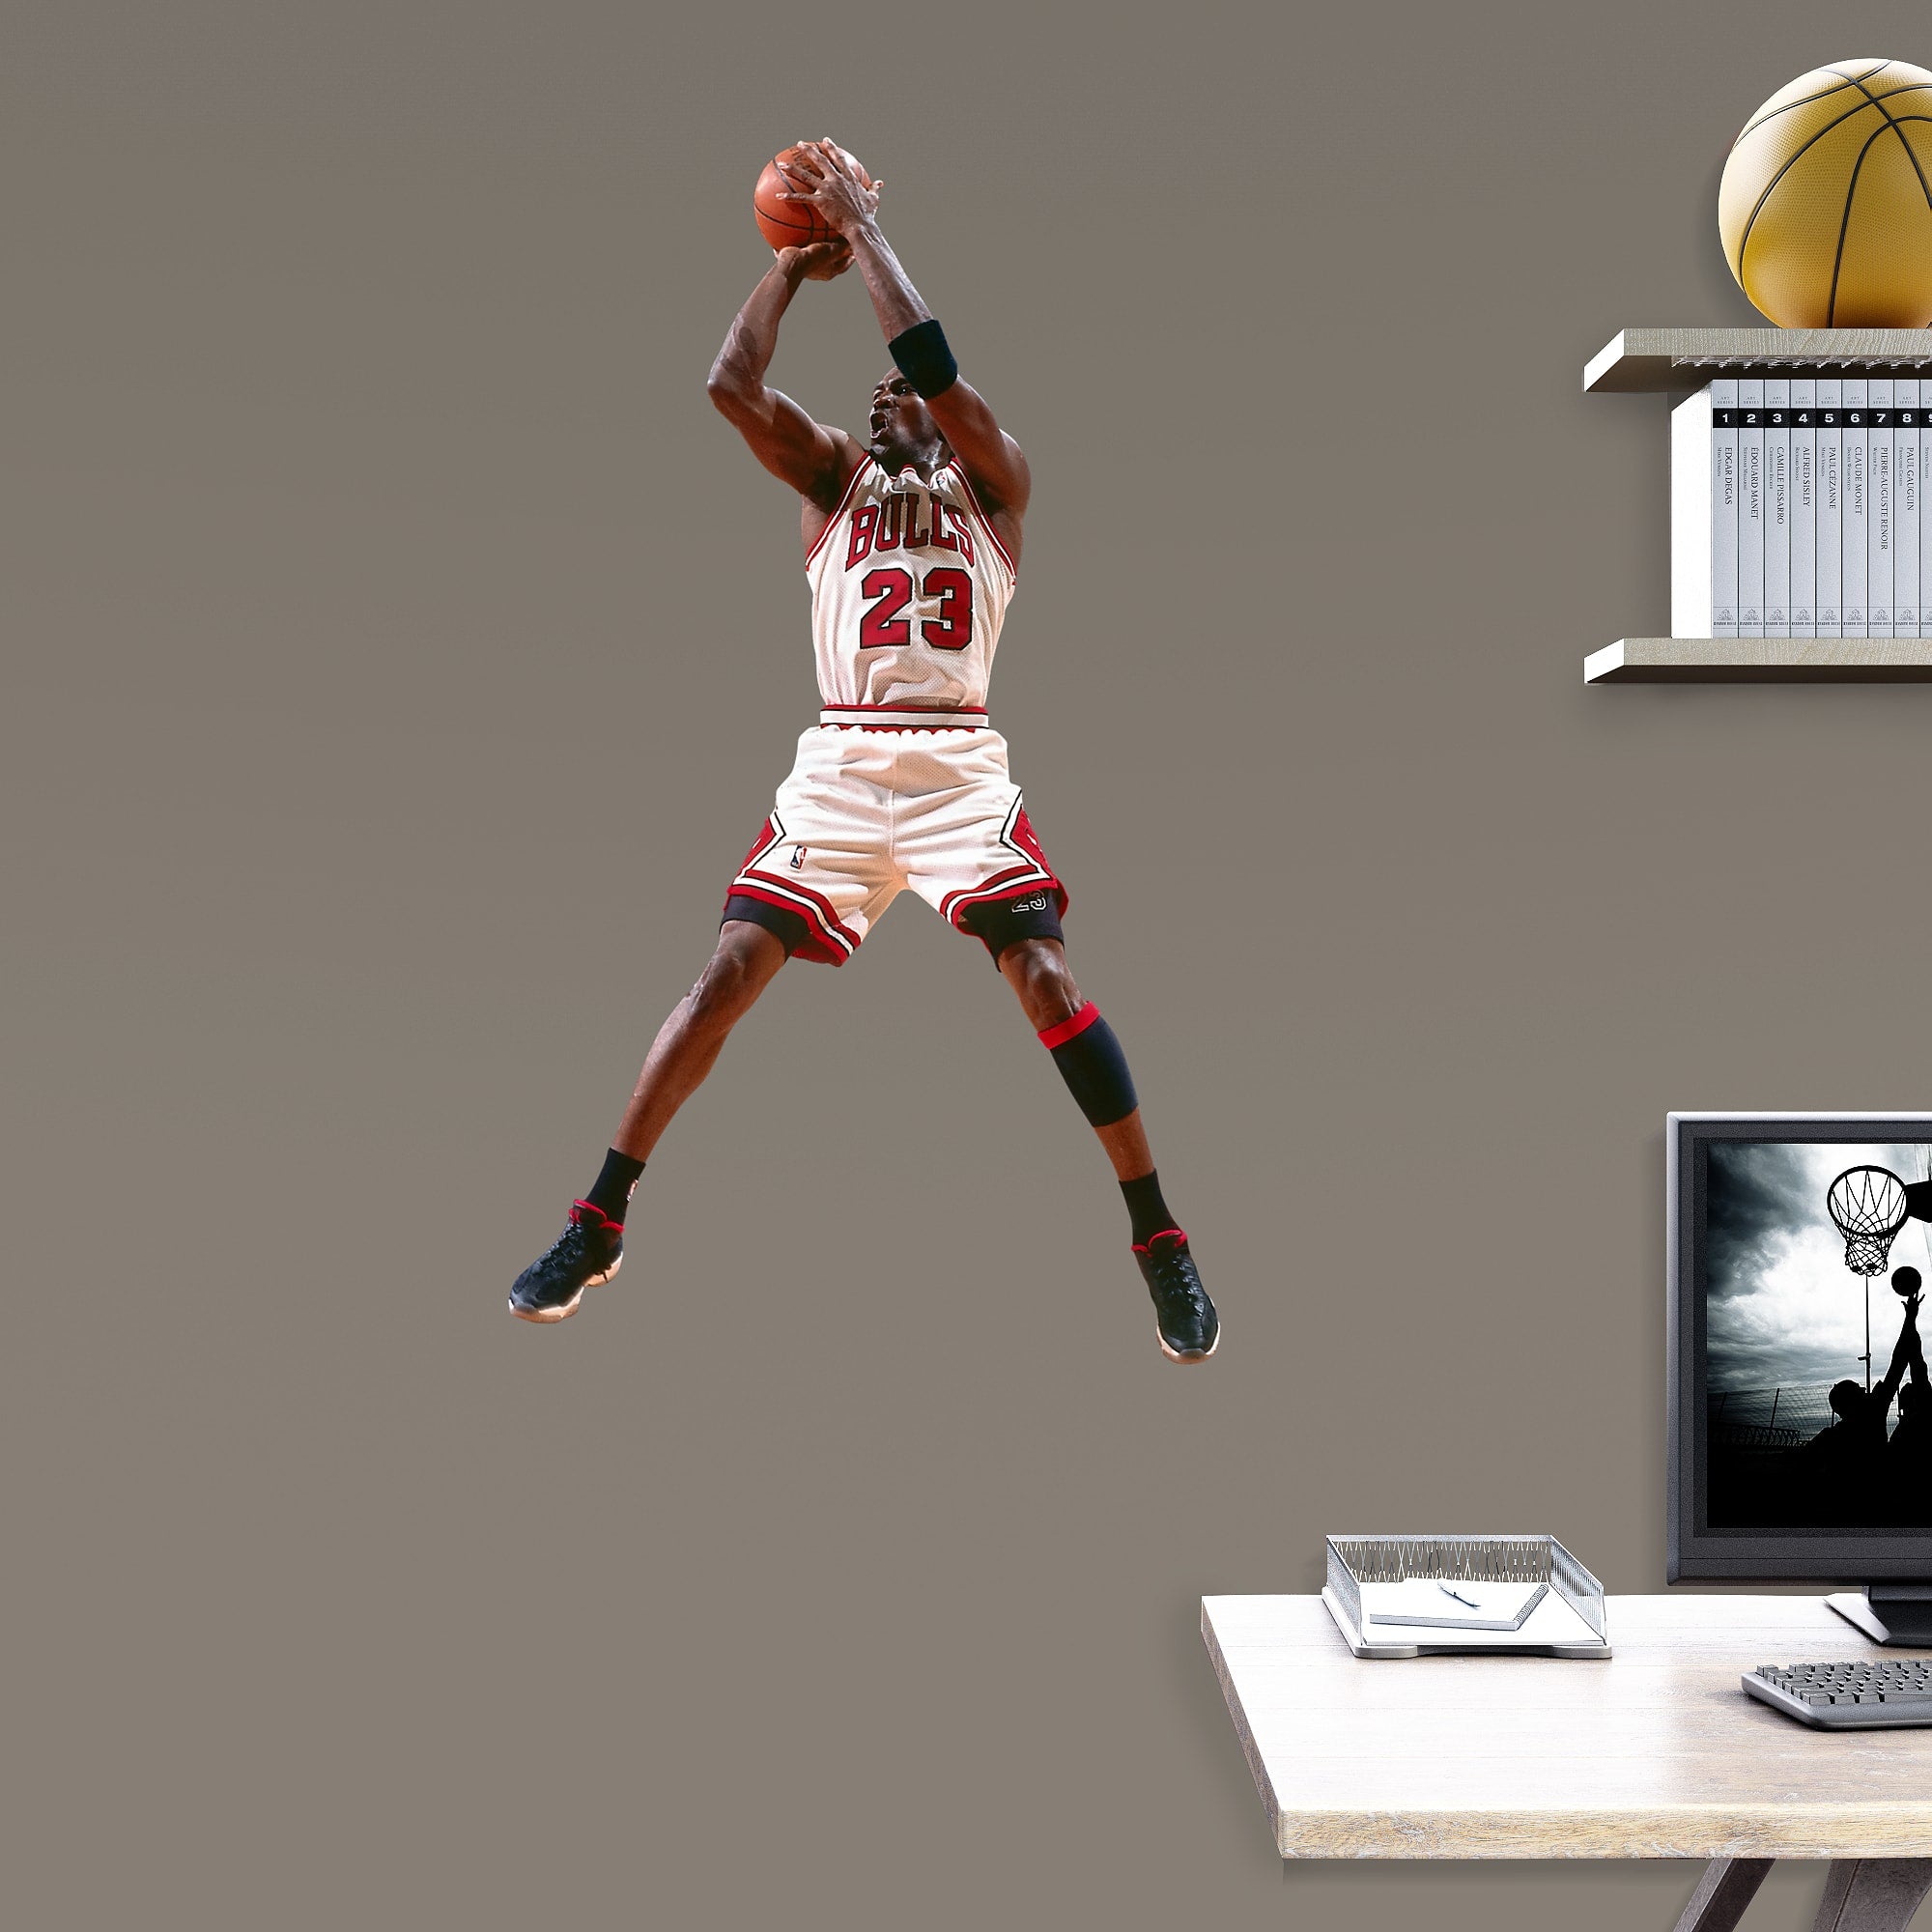 Michael Jordan for Chicago Bulls: Jumper - Officially Licensed NBA Removable Wall Decal 23.0"W x 39.0"H by Fathead | Vinyl